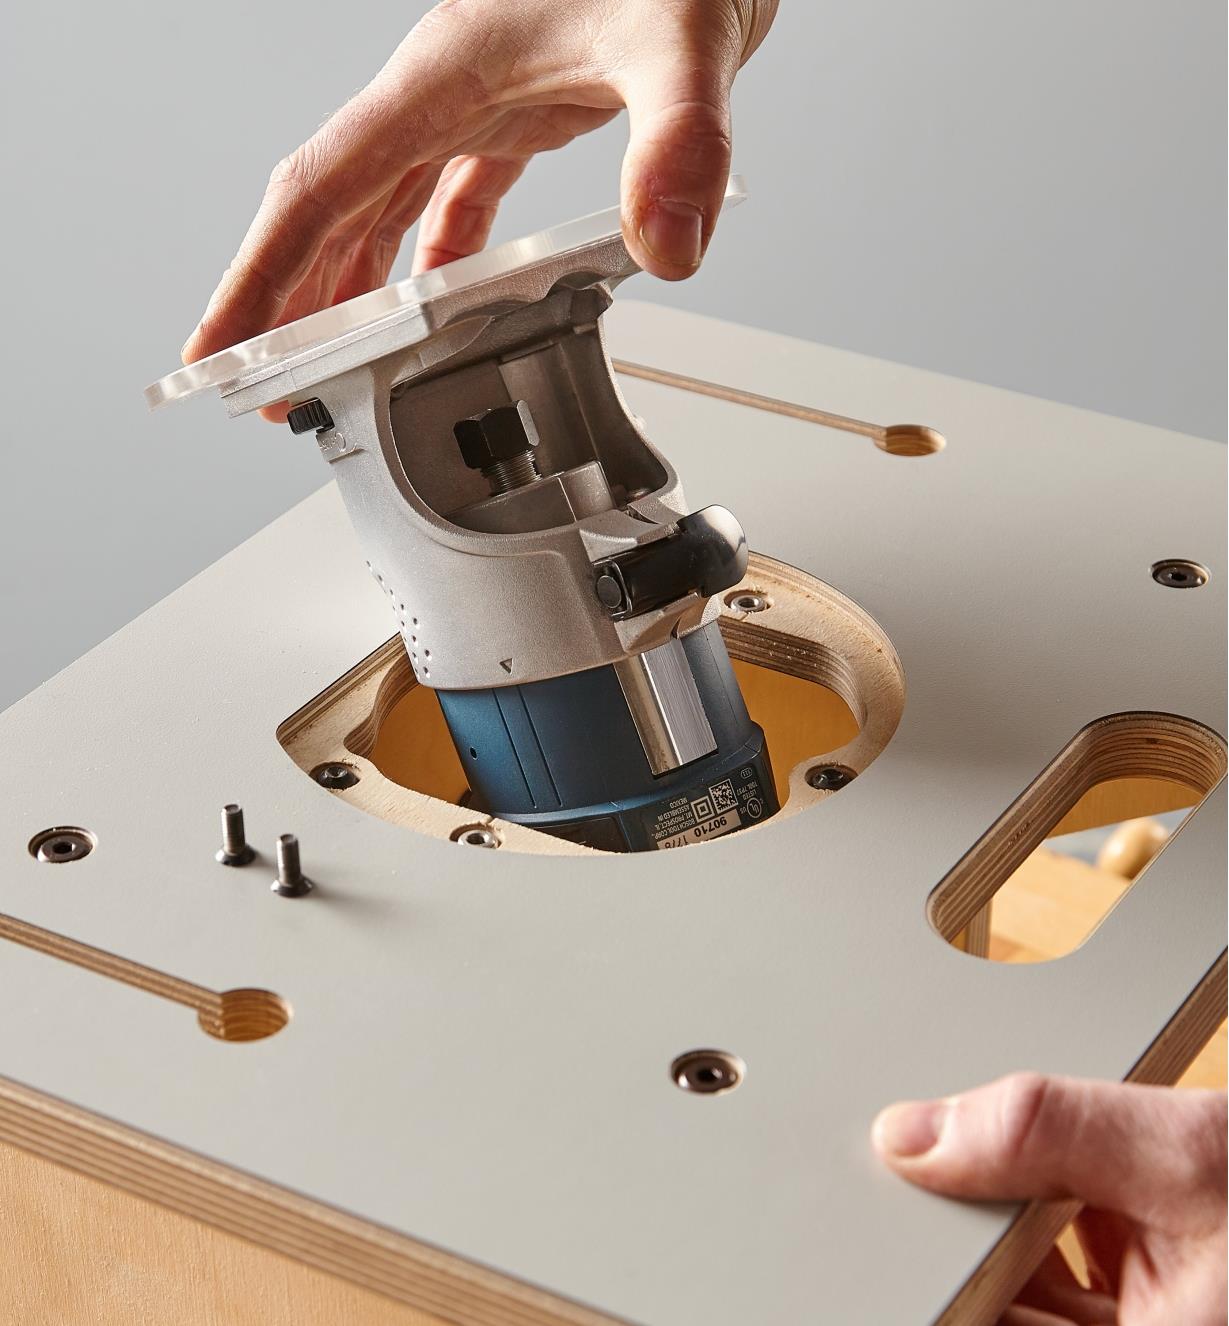 Inserting the compact router and base plate into the Veritas table for compact routers